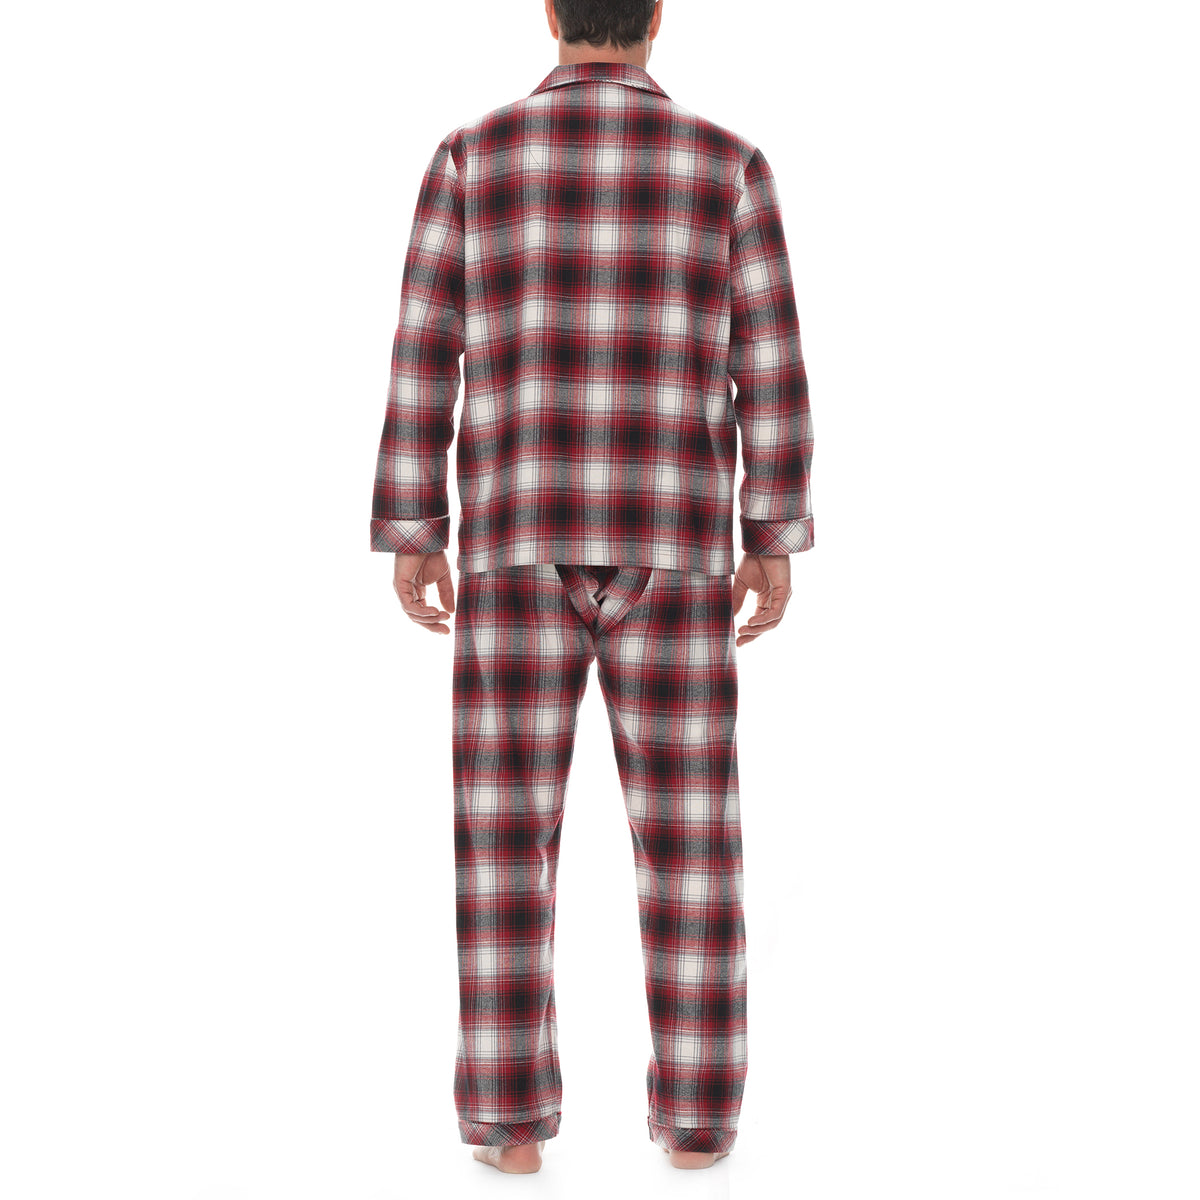 Plaid Soft Cotton Flannel Pajama's Vintage 90's Comfortable Traditional  Menswear Style Washable Sleepwear P J's Red Soft Flannel 